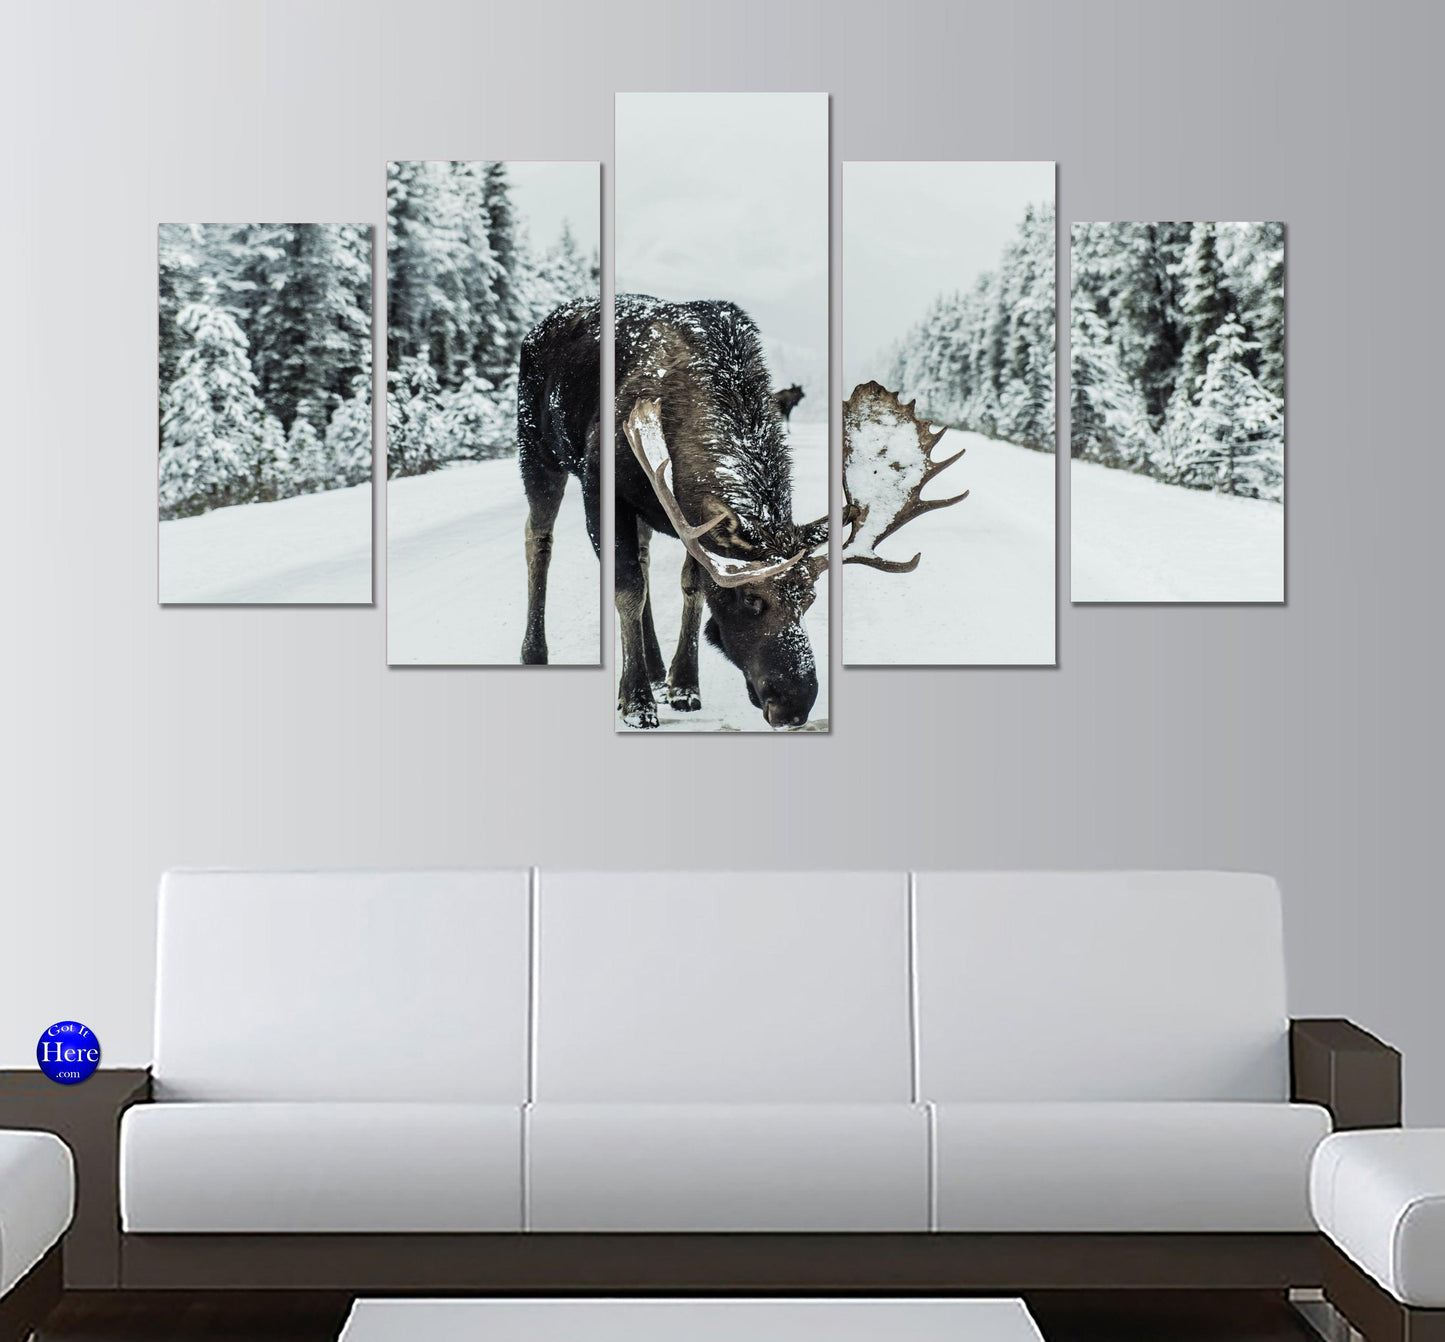 Moose In The Snow Canada USA Border 5 Panel Canvas Print Wall Art - GotItHere.com